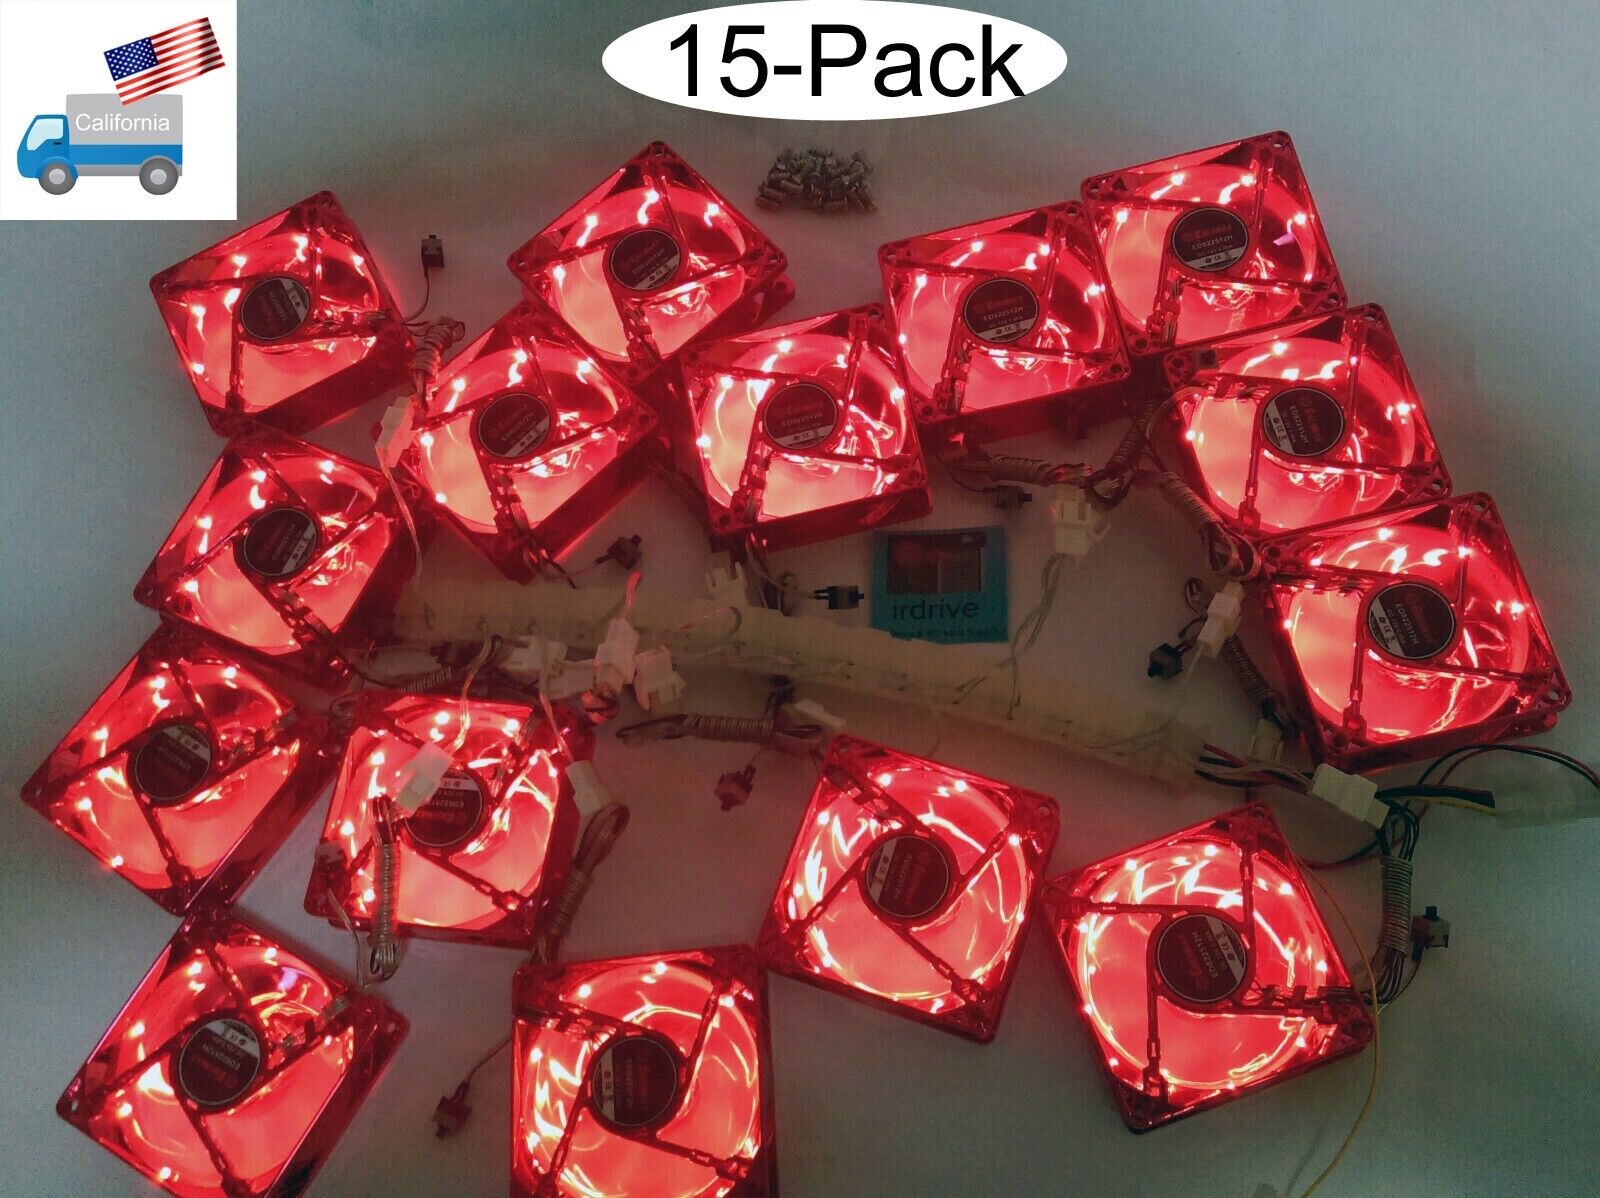 Wholesale Lot 15: NEW 80mm RED LED Cooling Fan Array Kit for Open Mining/Gaming